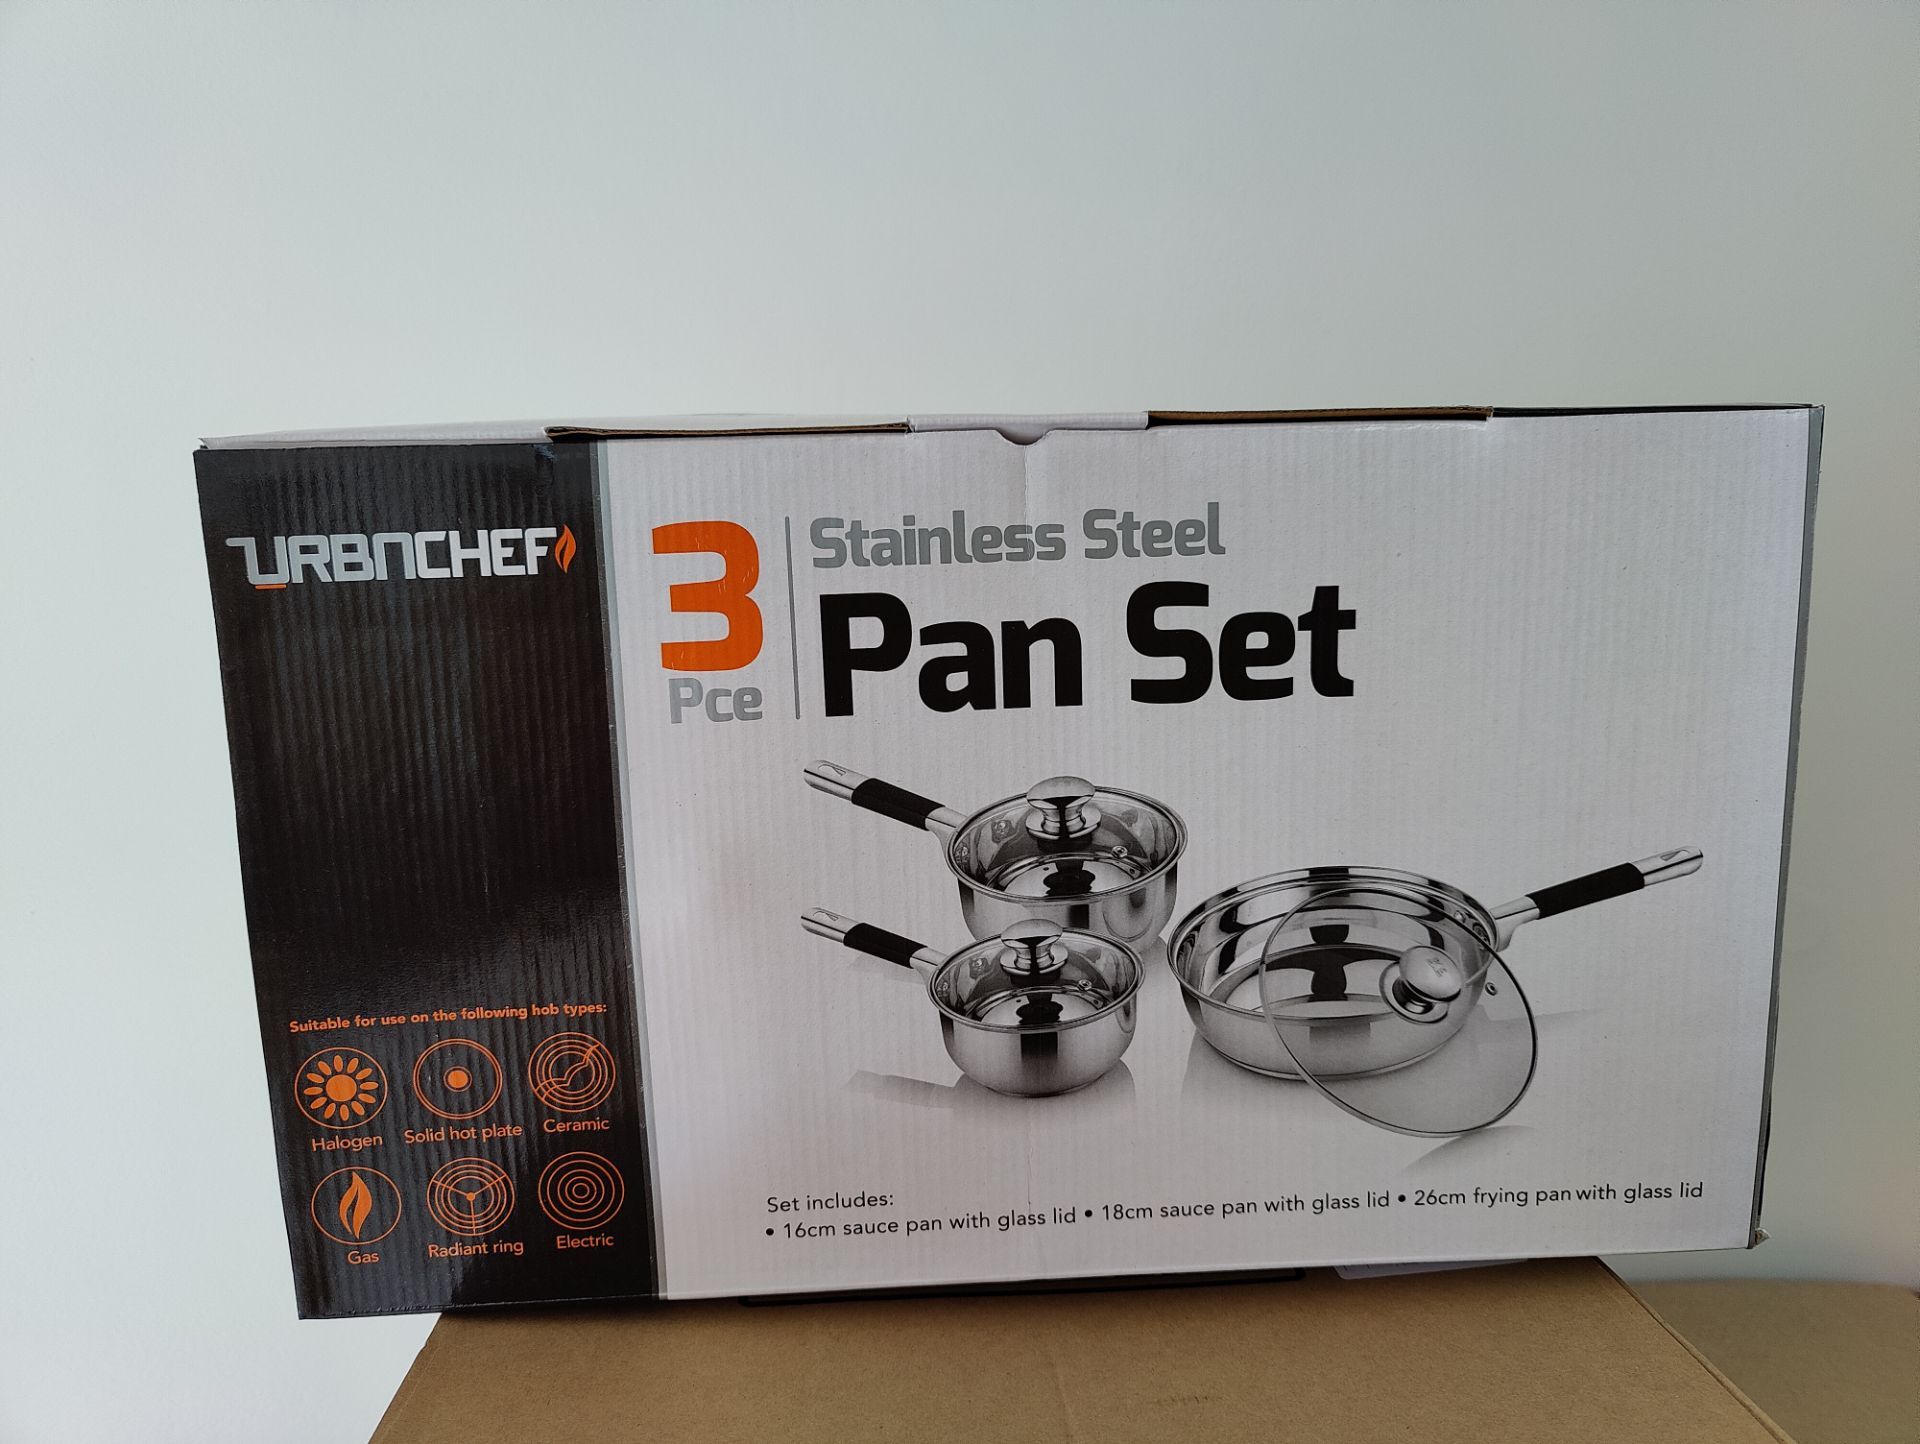 3 X BOXED SETS OF URBNCHEF 3 PIECE STAINLESS STEEL PAN SETS. EACH SET INCLUDES: 16CM SAUCE PAN